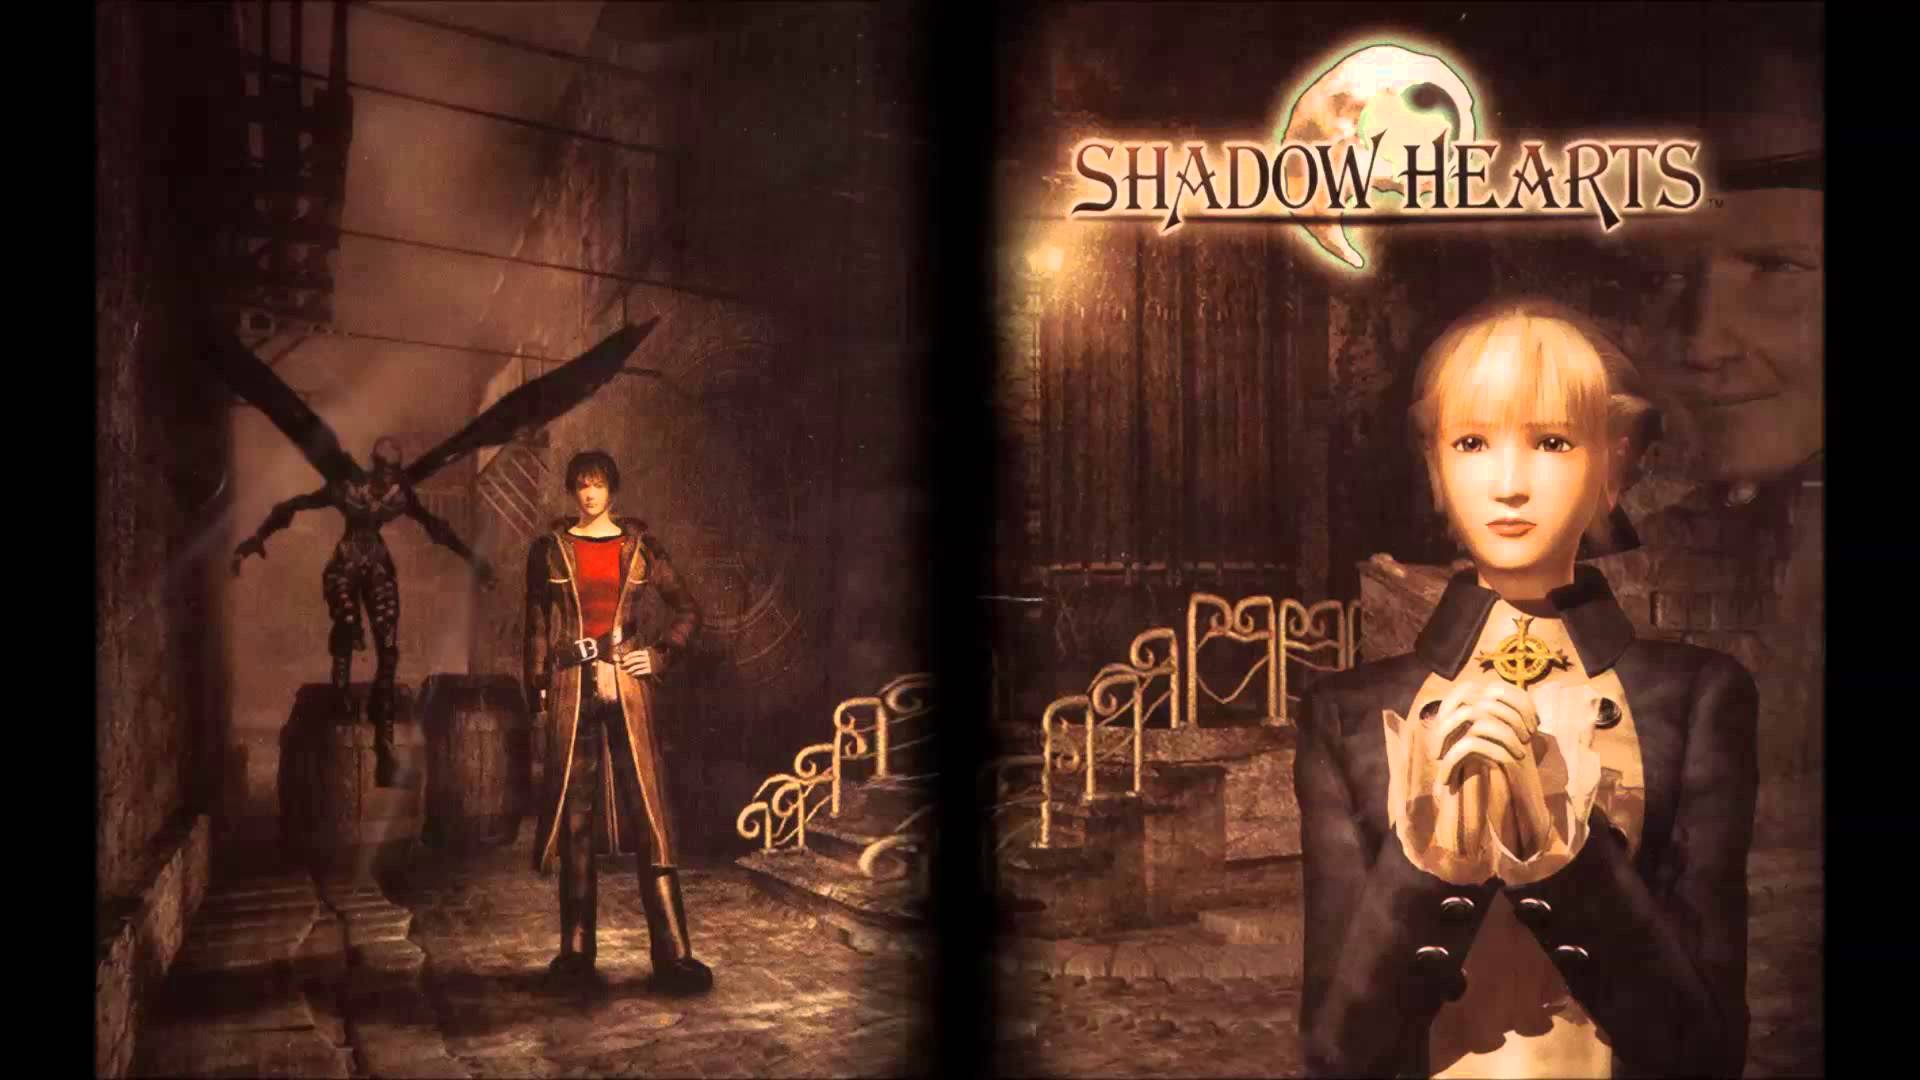 Shadow Hearts Backgrounds, Compatible - PC, Mobile, Gadgets| 1920x1080 px